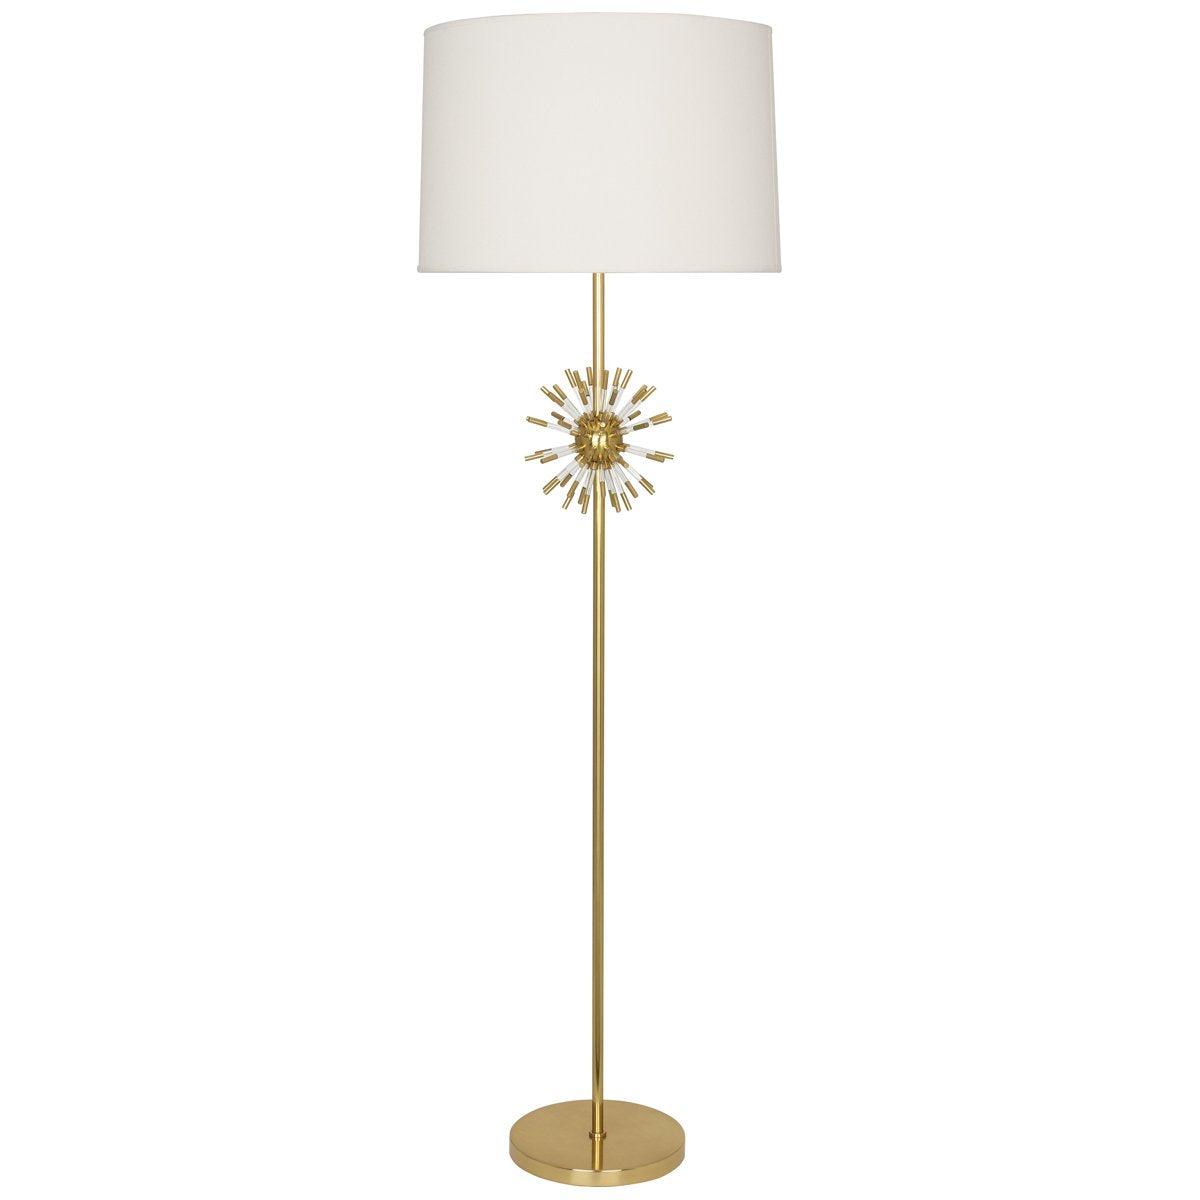 Andromeda Floor Lamp in Modern Brass Finish w Clear Acrylic Accents design by Robert Abbey